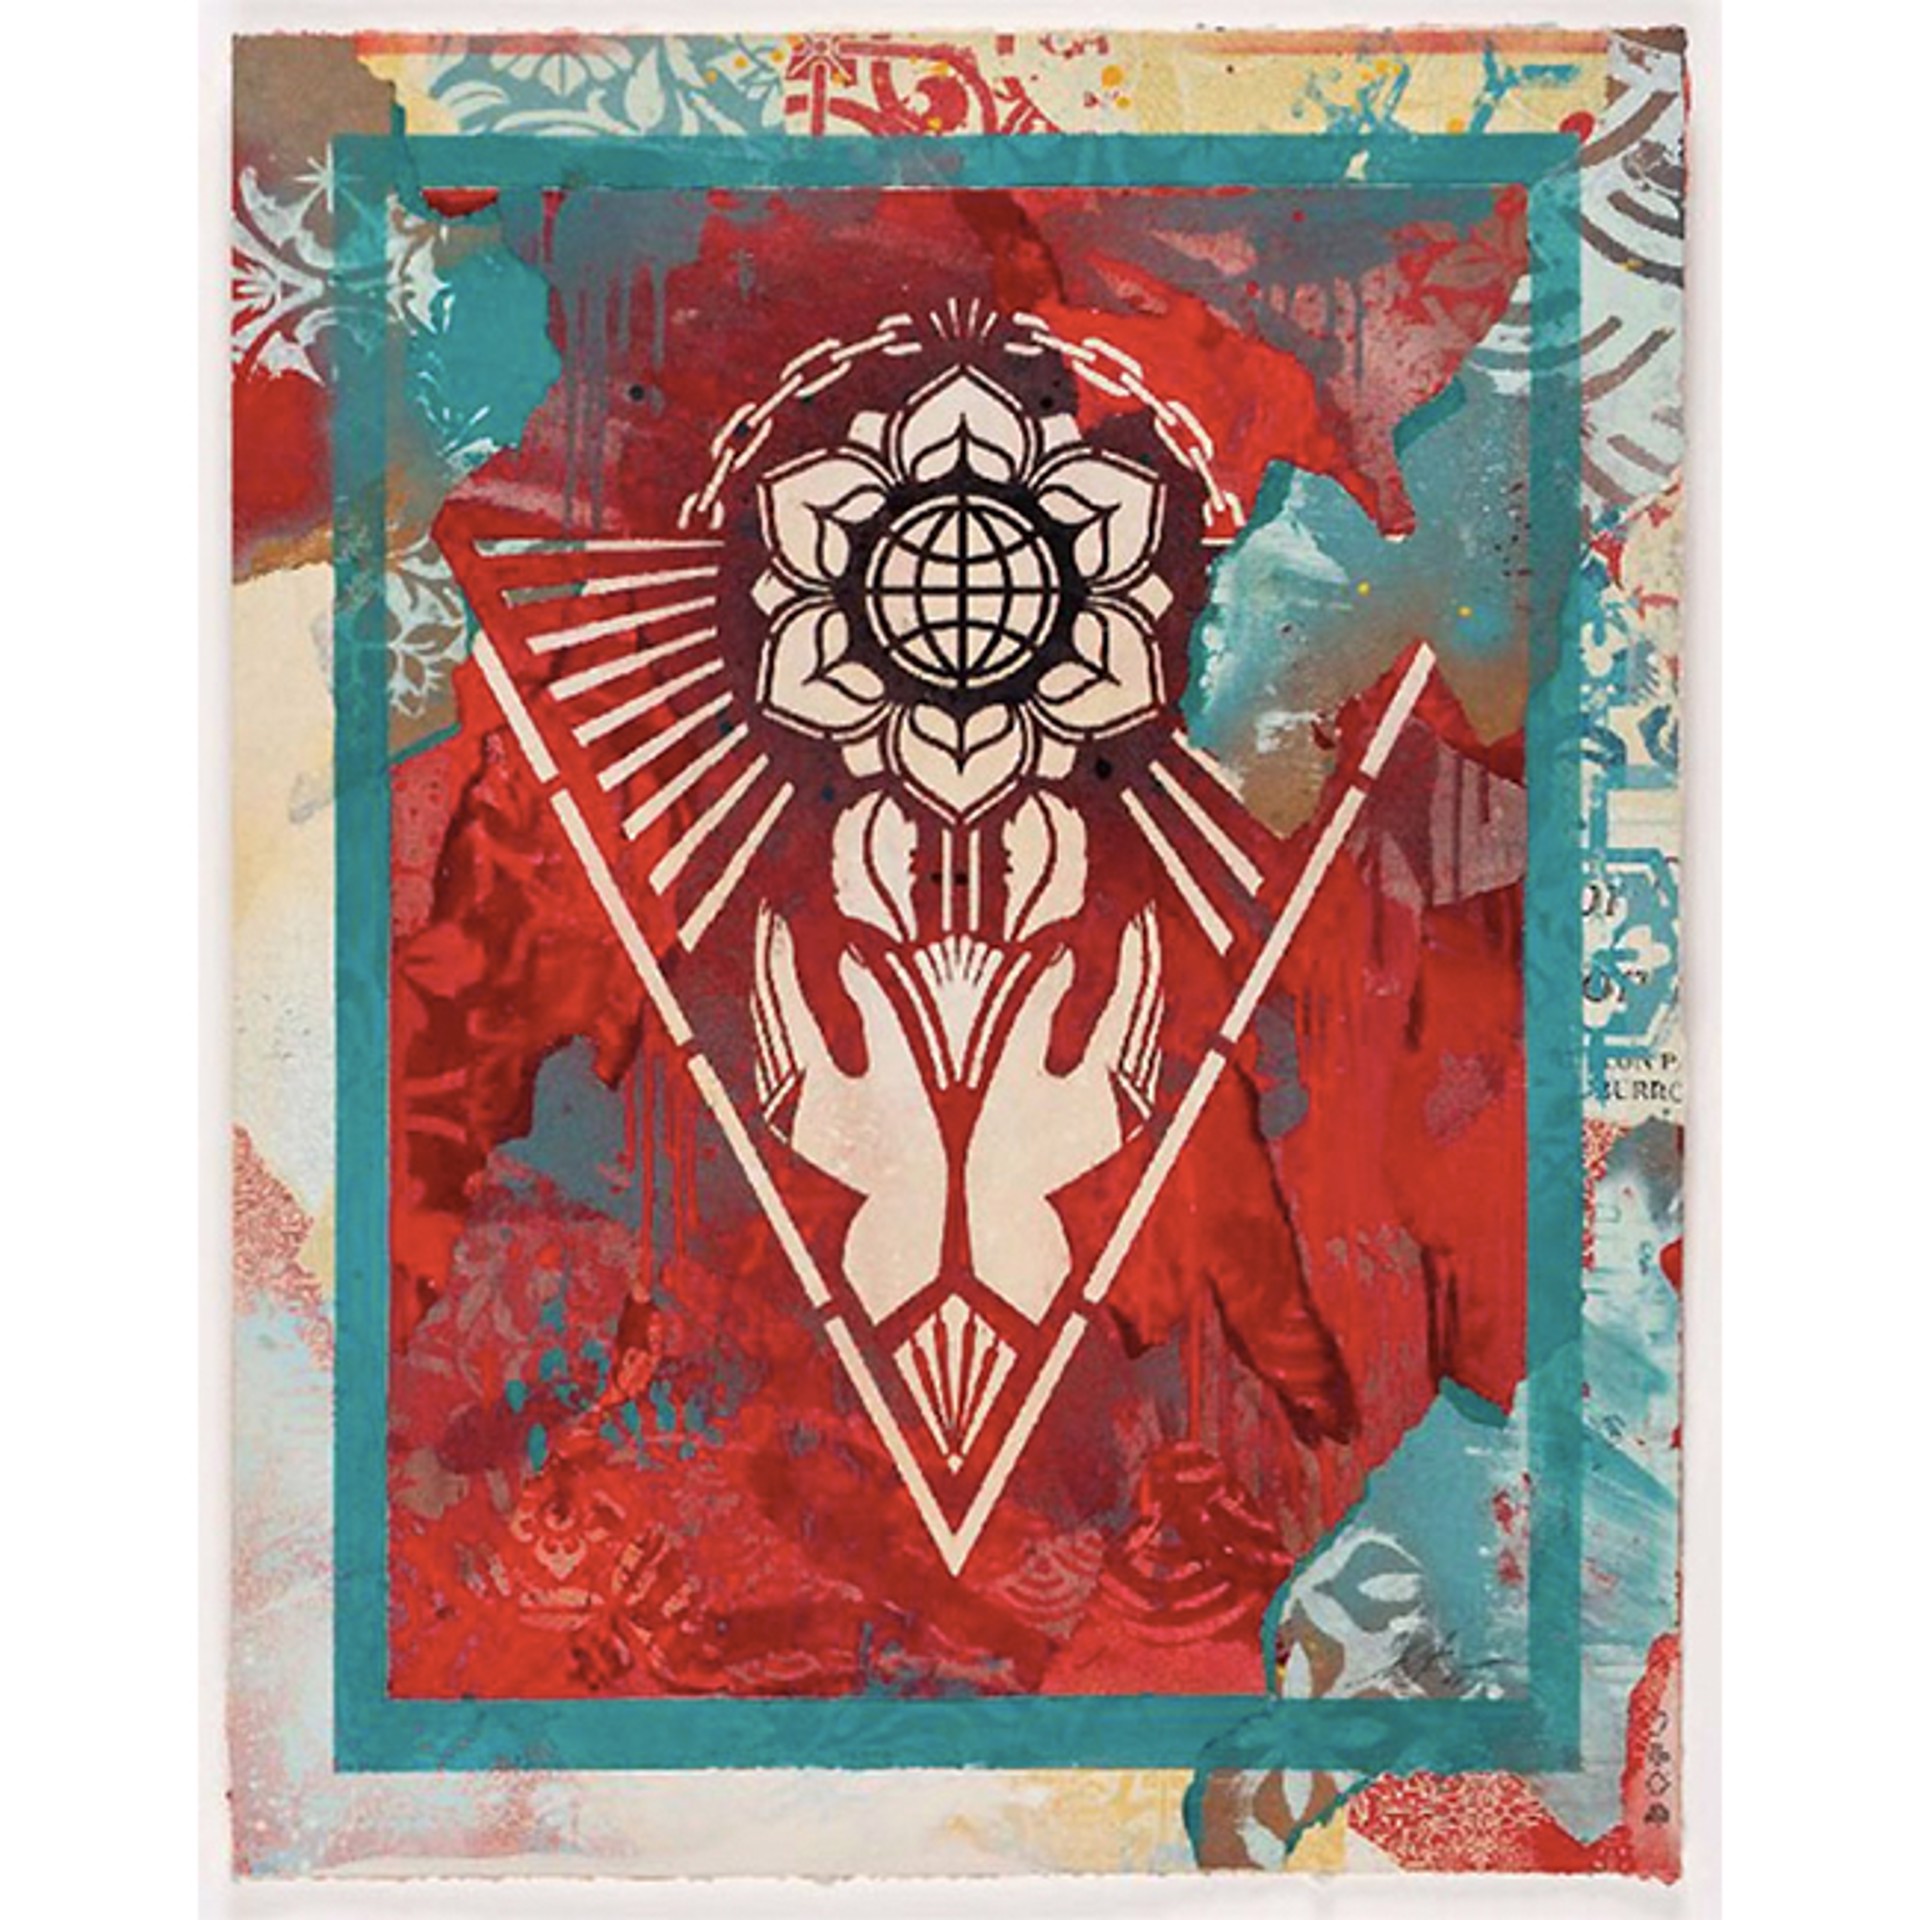 Respect and Justice Study (Red) by Shepard Fairey